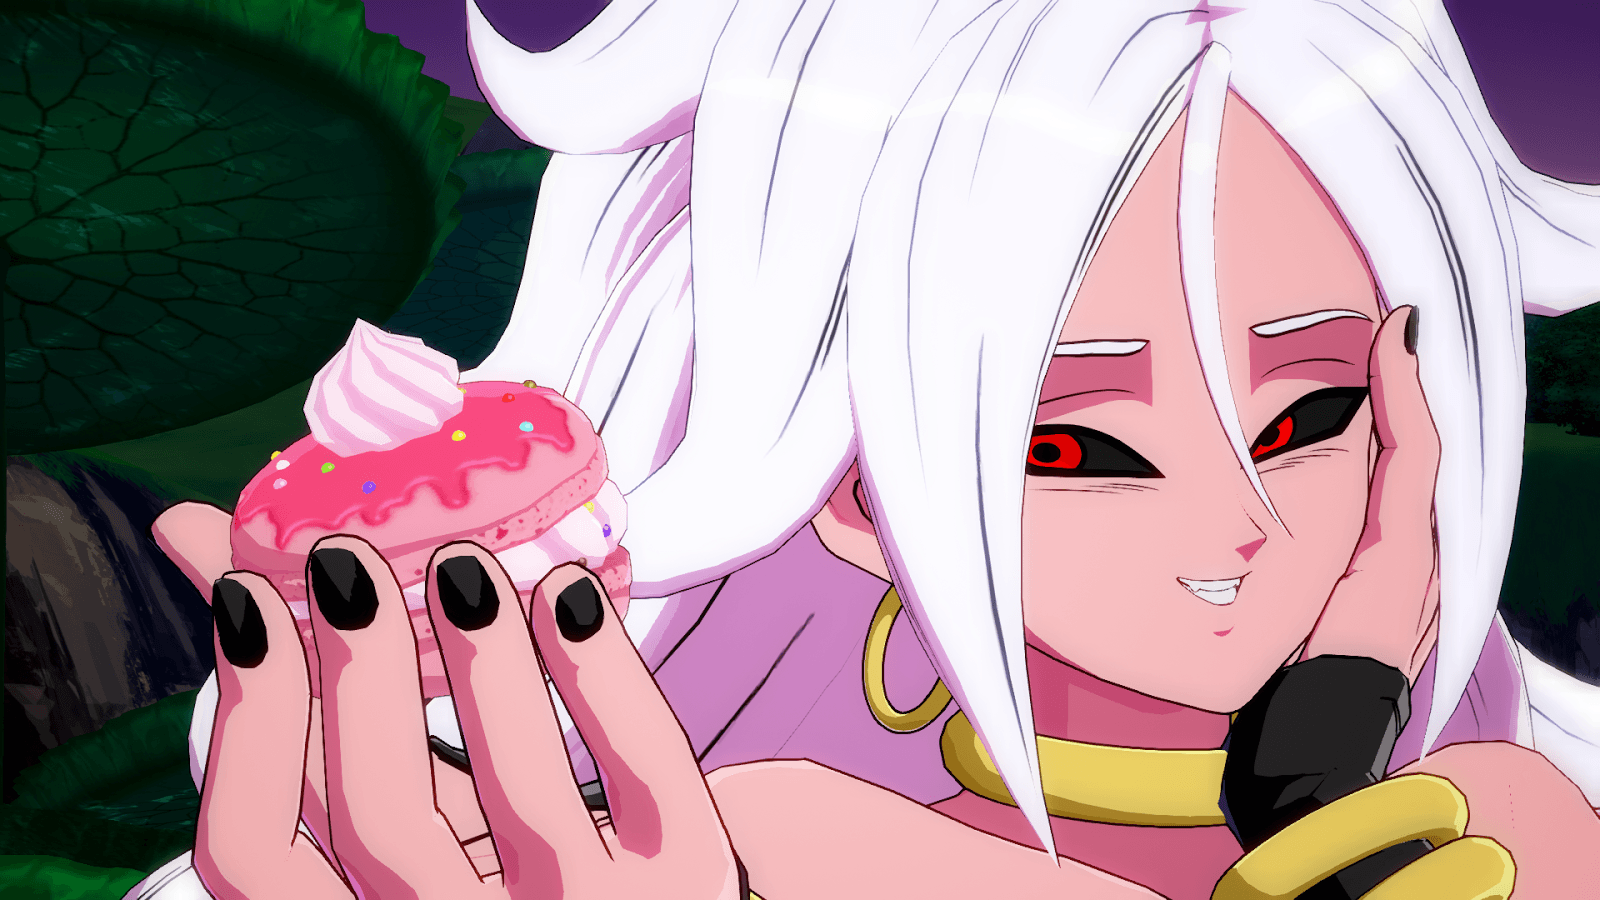 Android 21 joins DRAGON BALL FighterZ as Playable Character